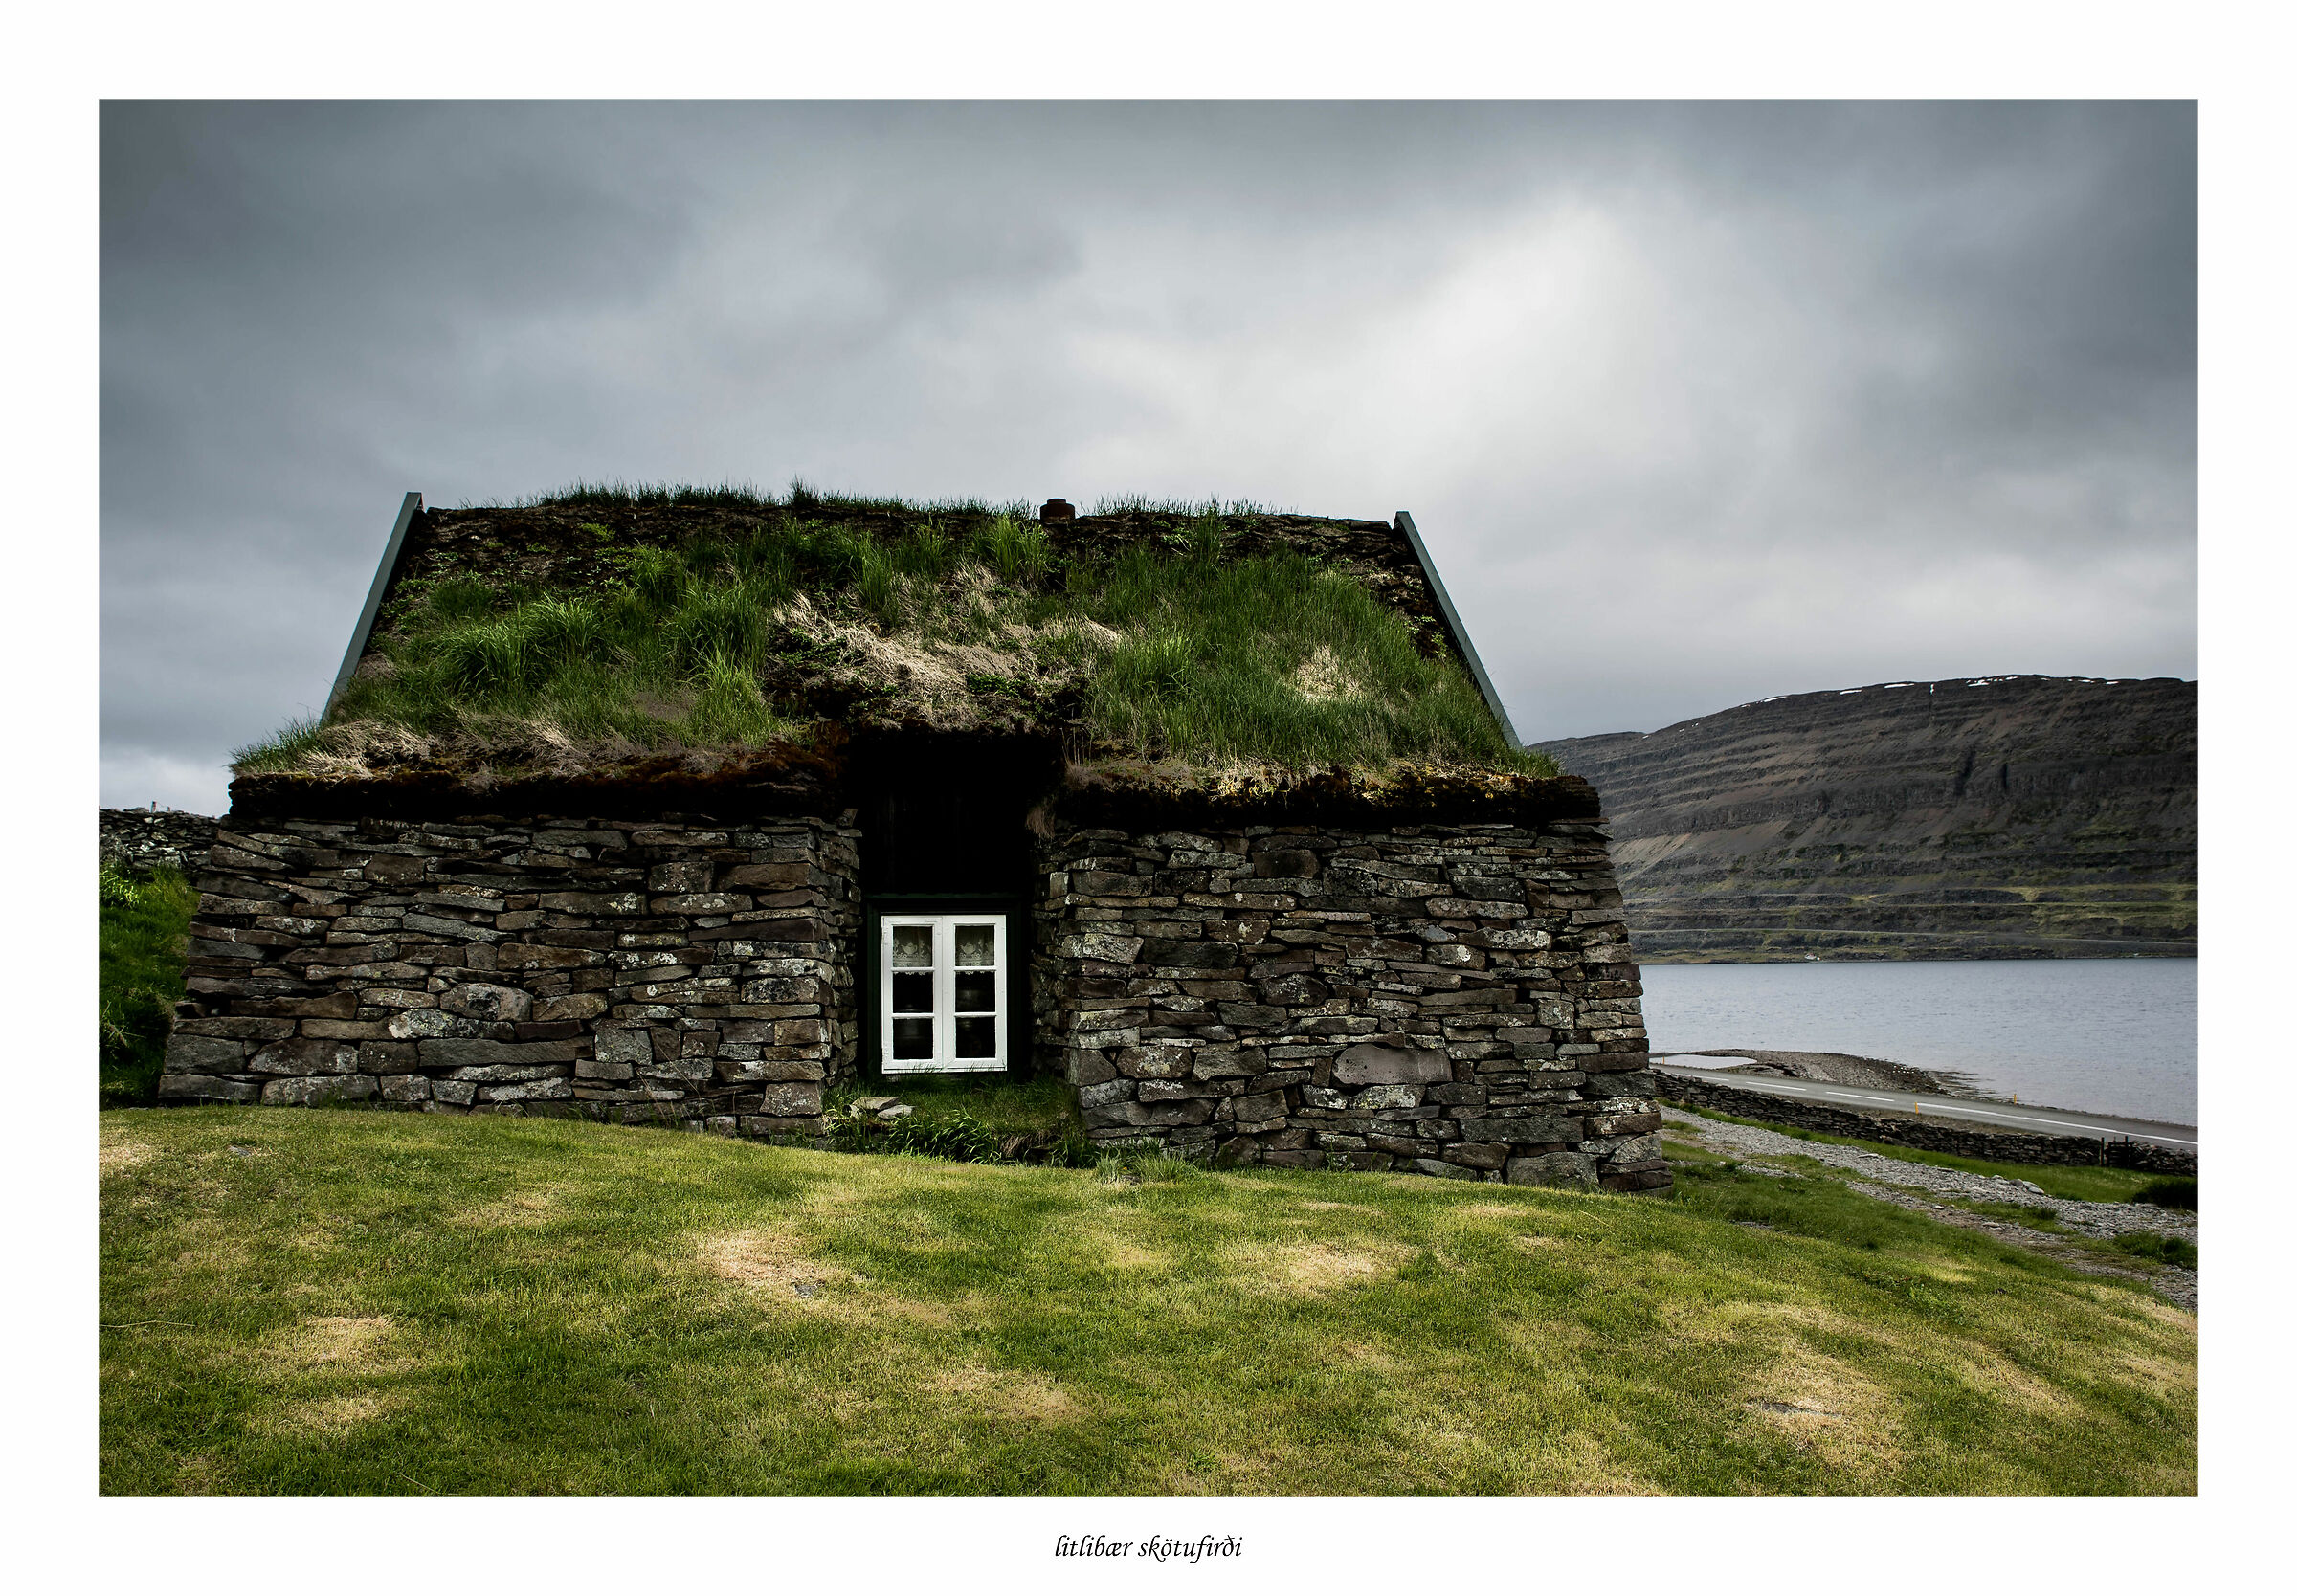 House with a grass roof....